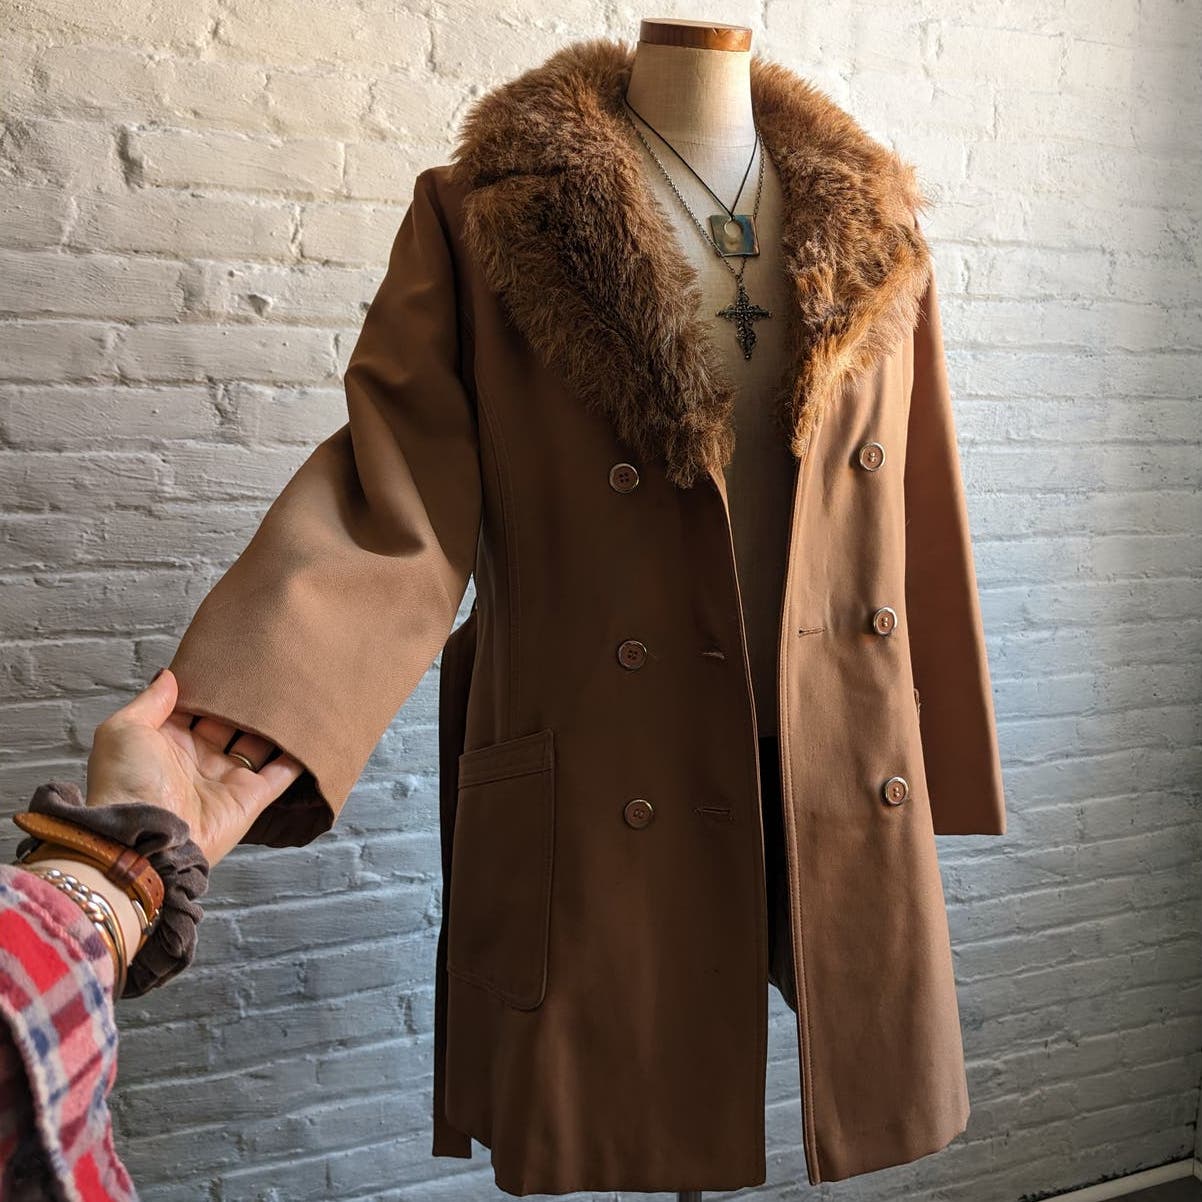 70s Vintage Faux Fur Brown Penny Lane Trench Coat Groovy Minimalist Chic Jacket